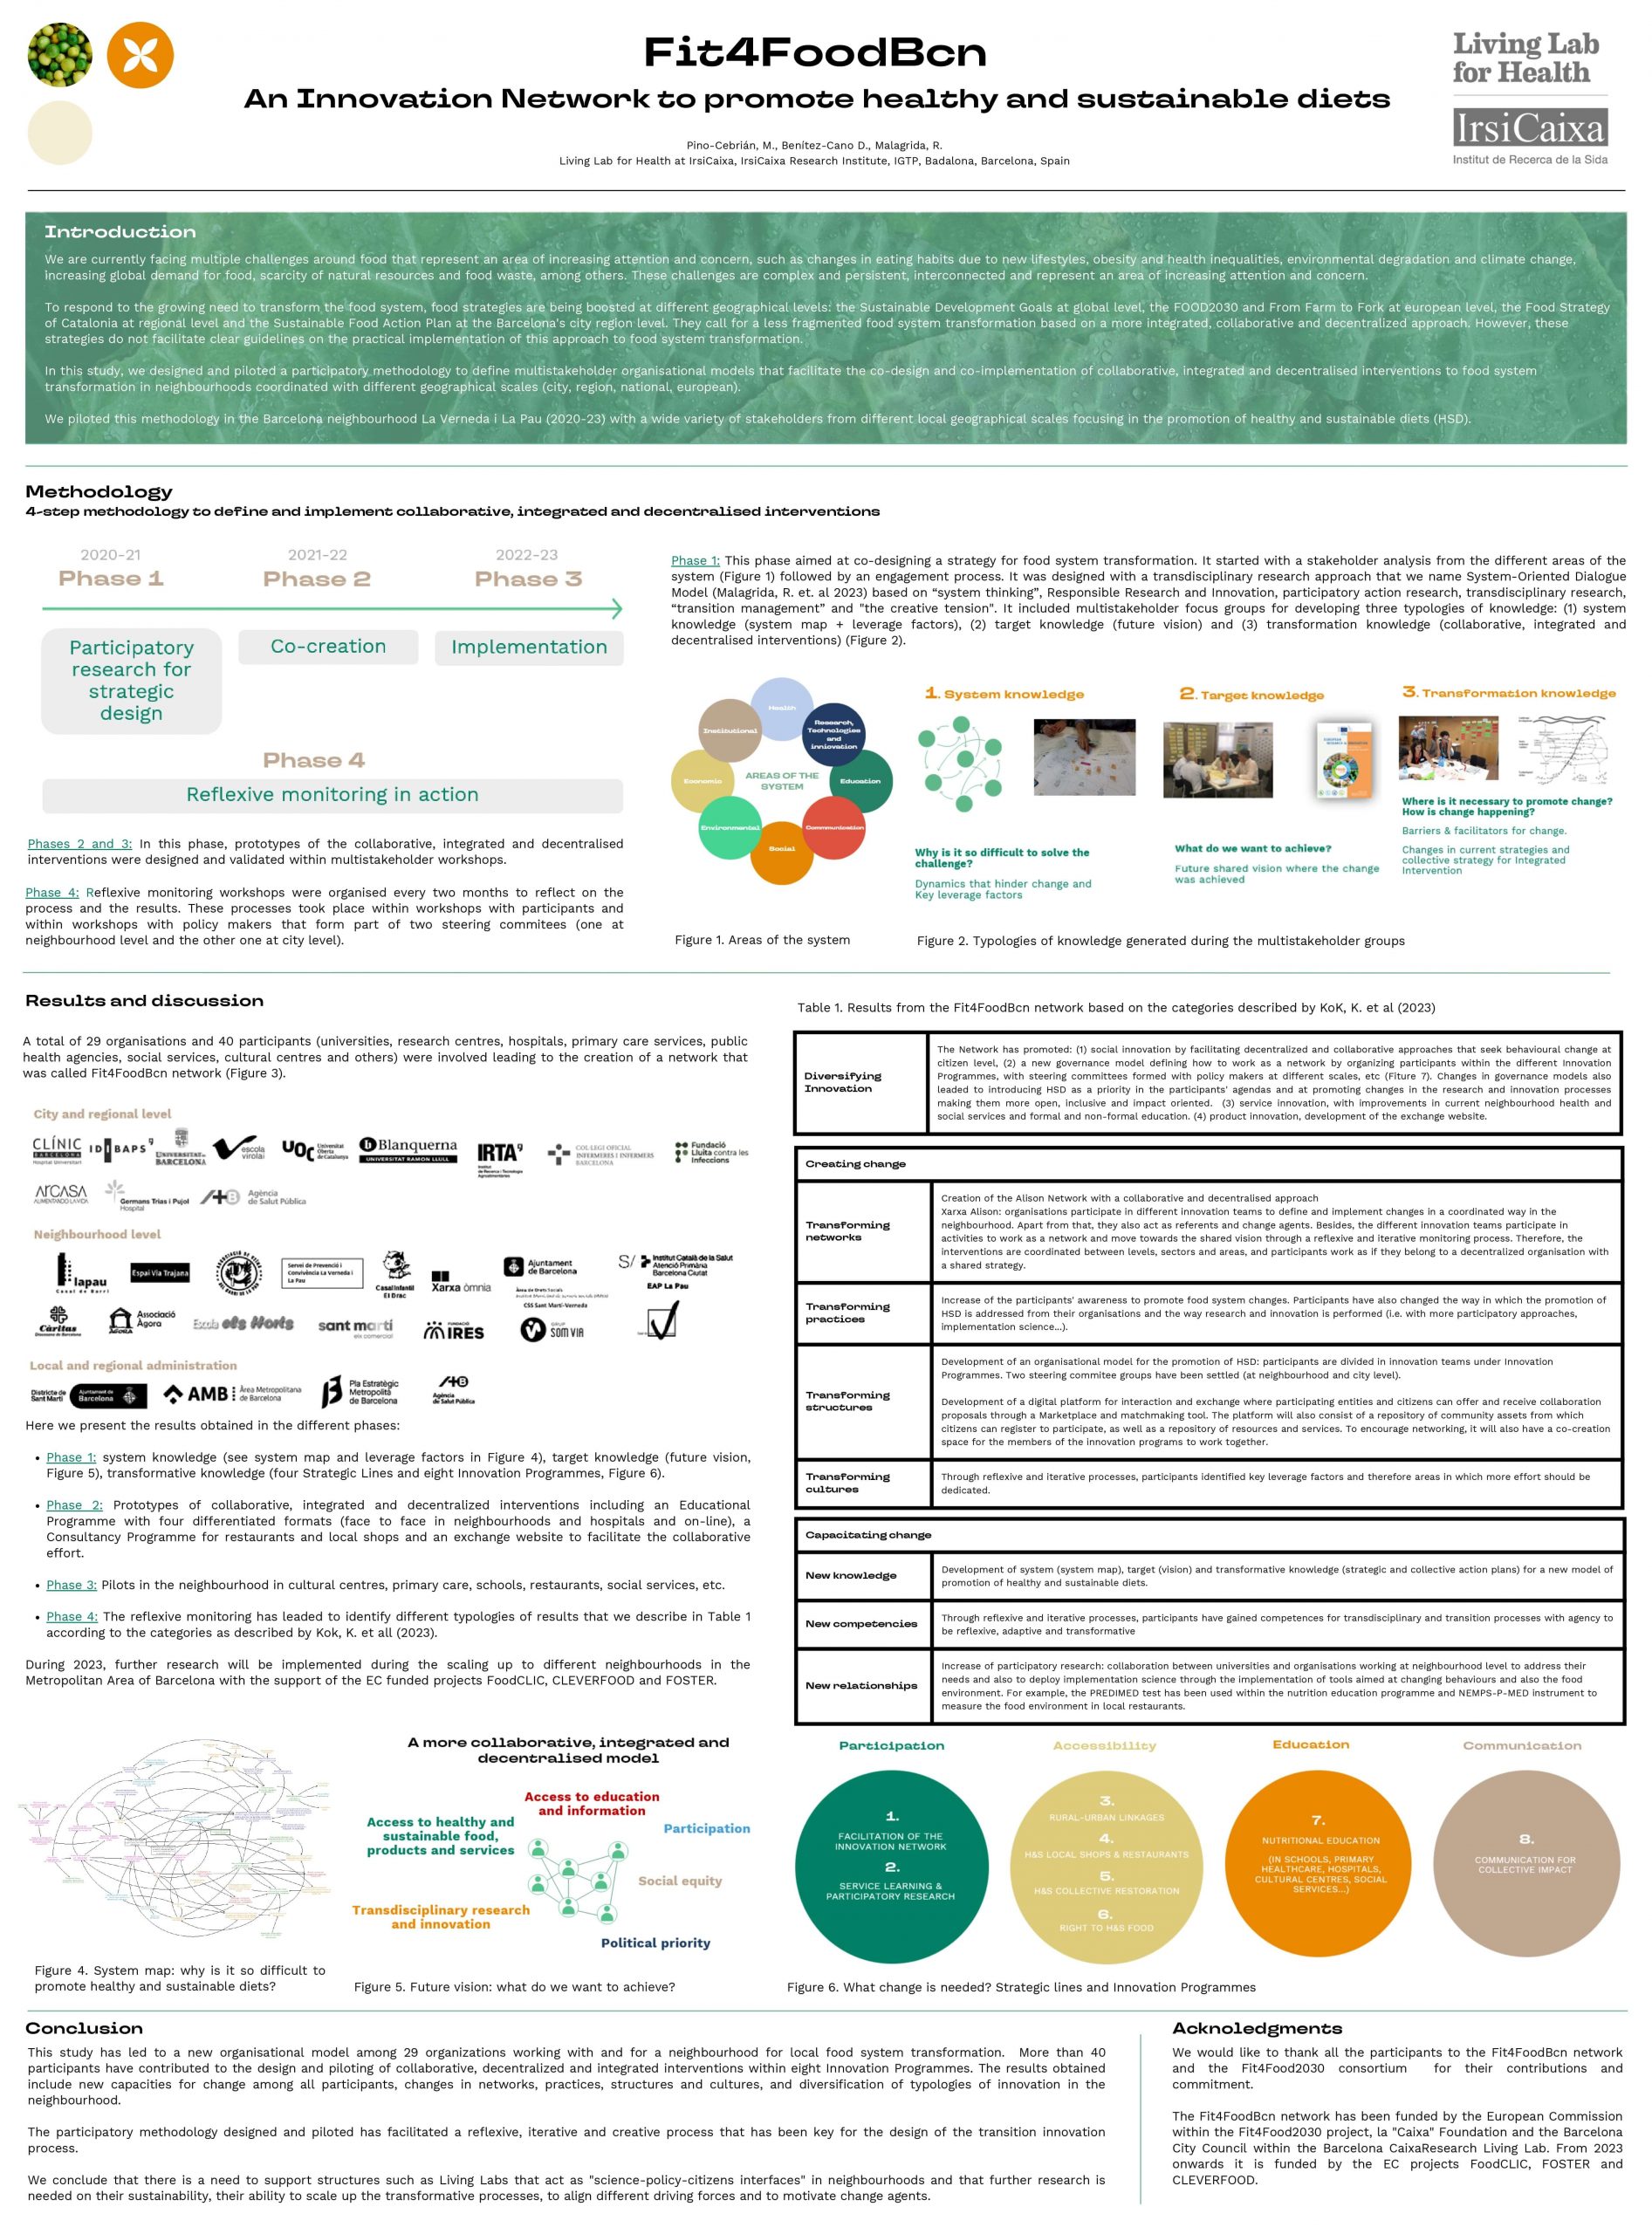 Fit4FoodBcn-Innovation-Network-poster-Edible cities network conference